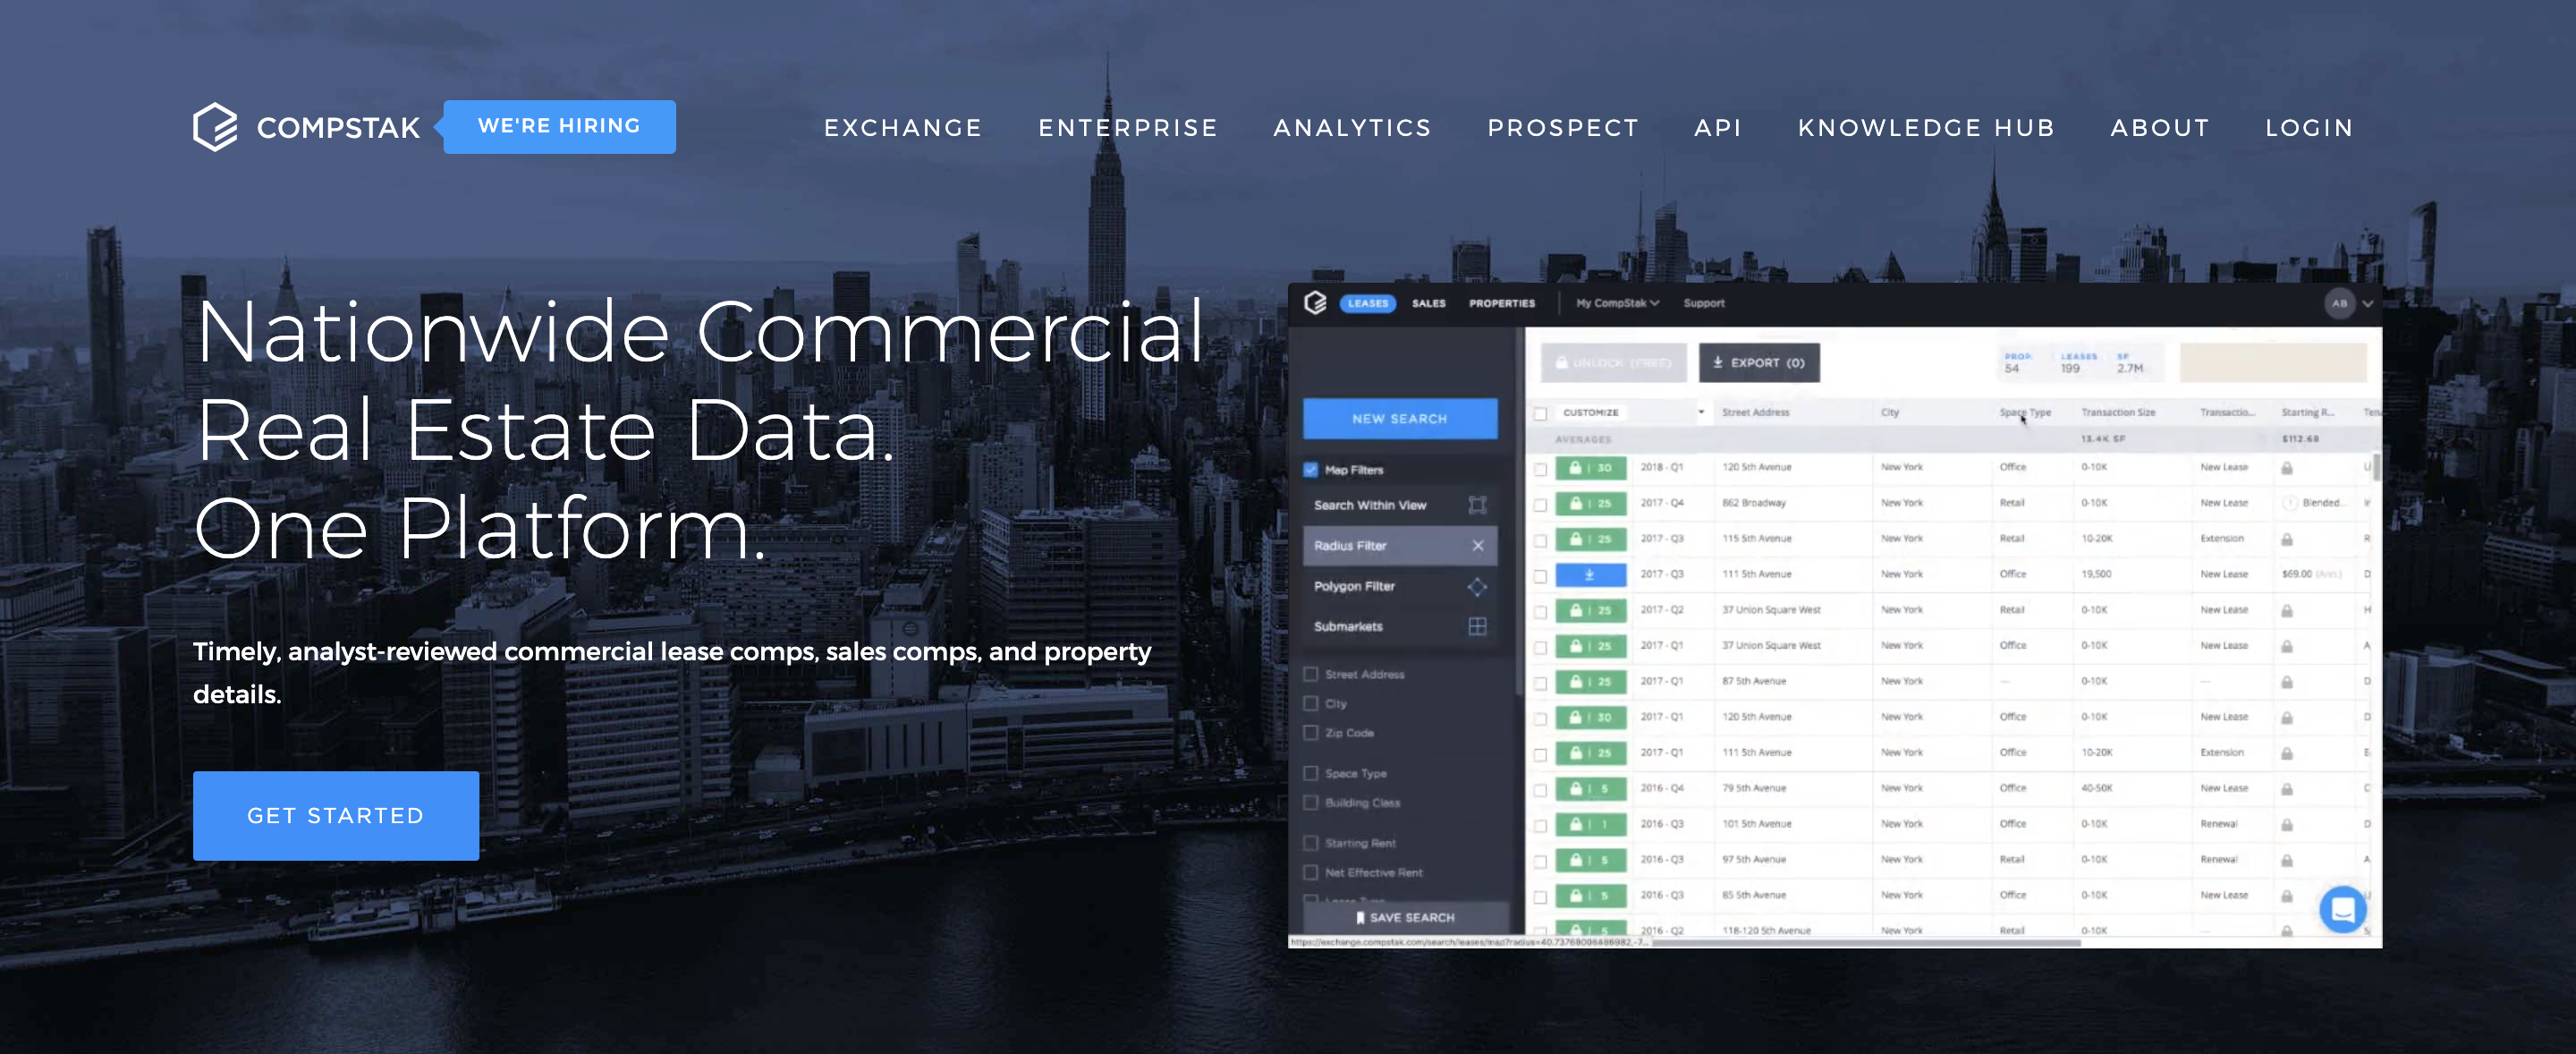 CRE data providers | CompStak